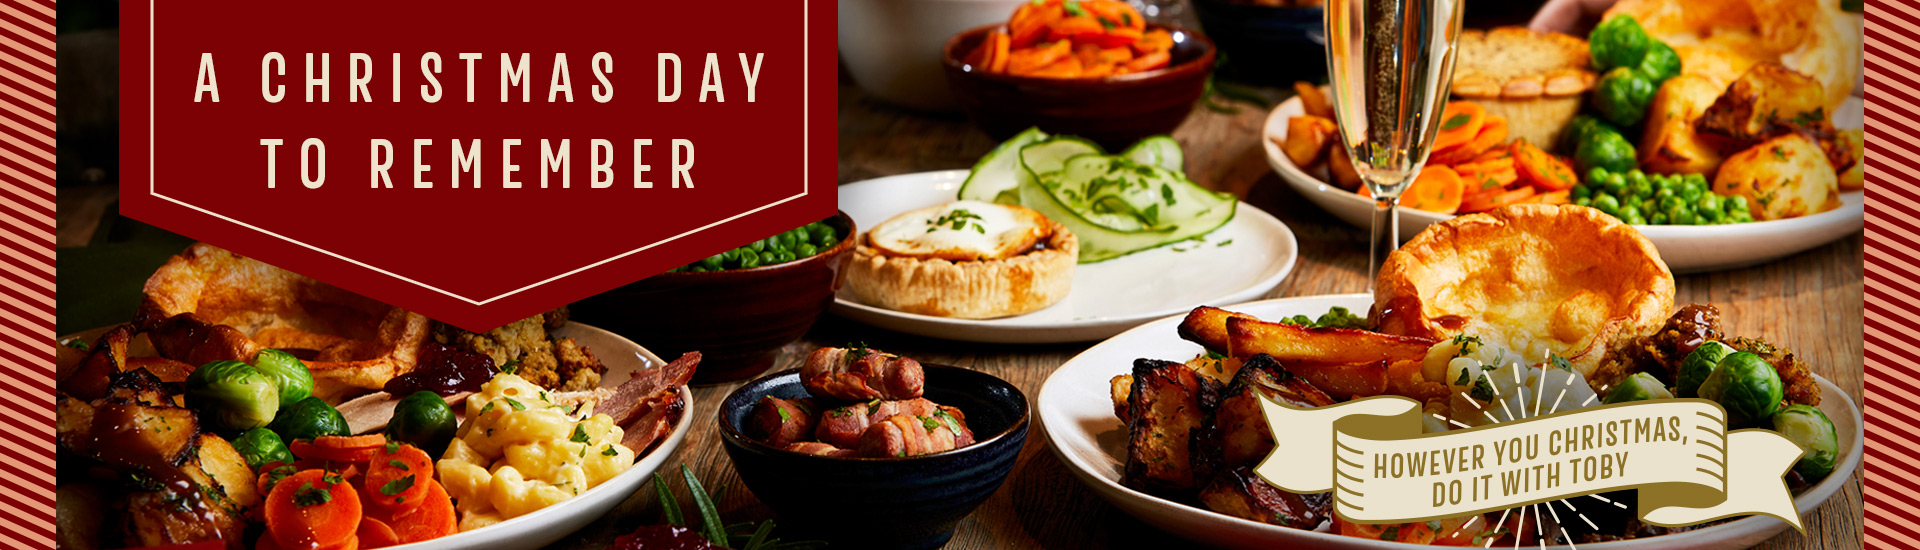 Christmas Day menu at Toby Carvery Bolton